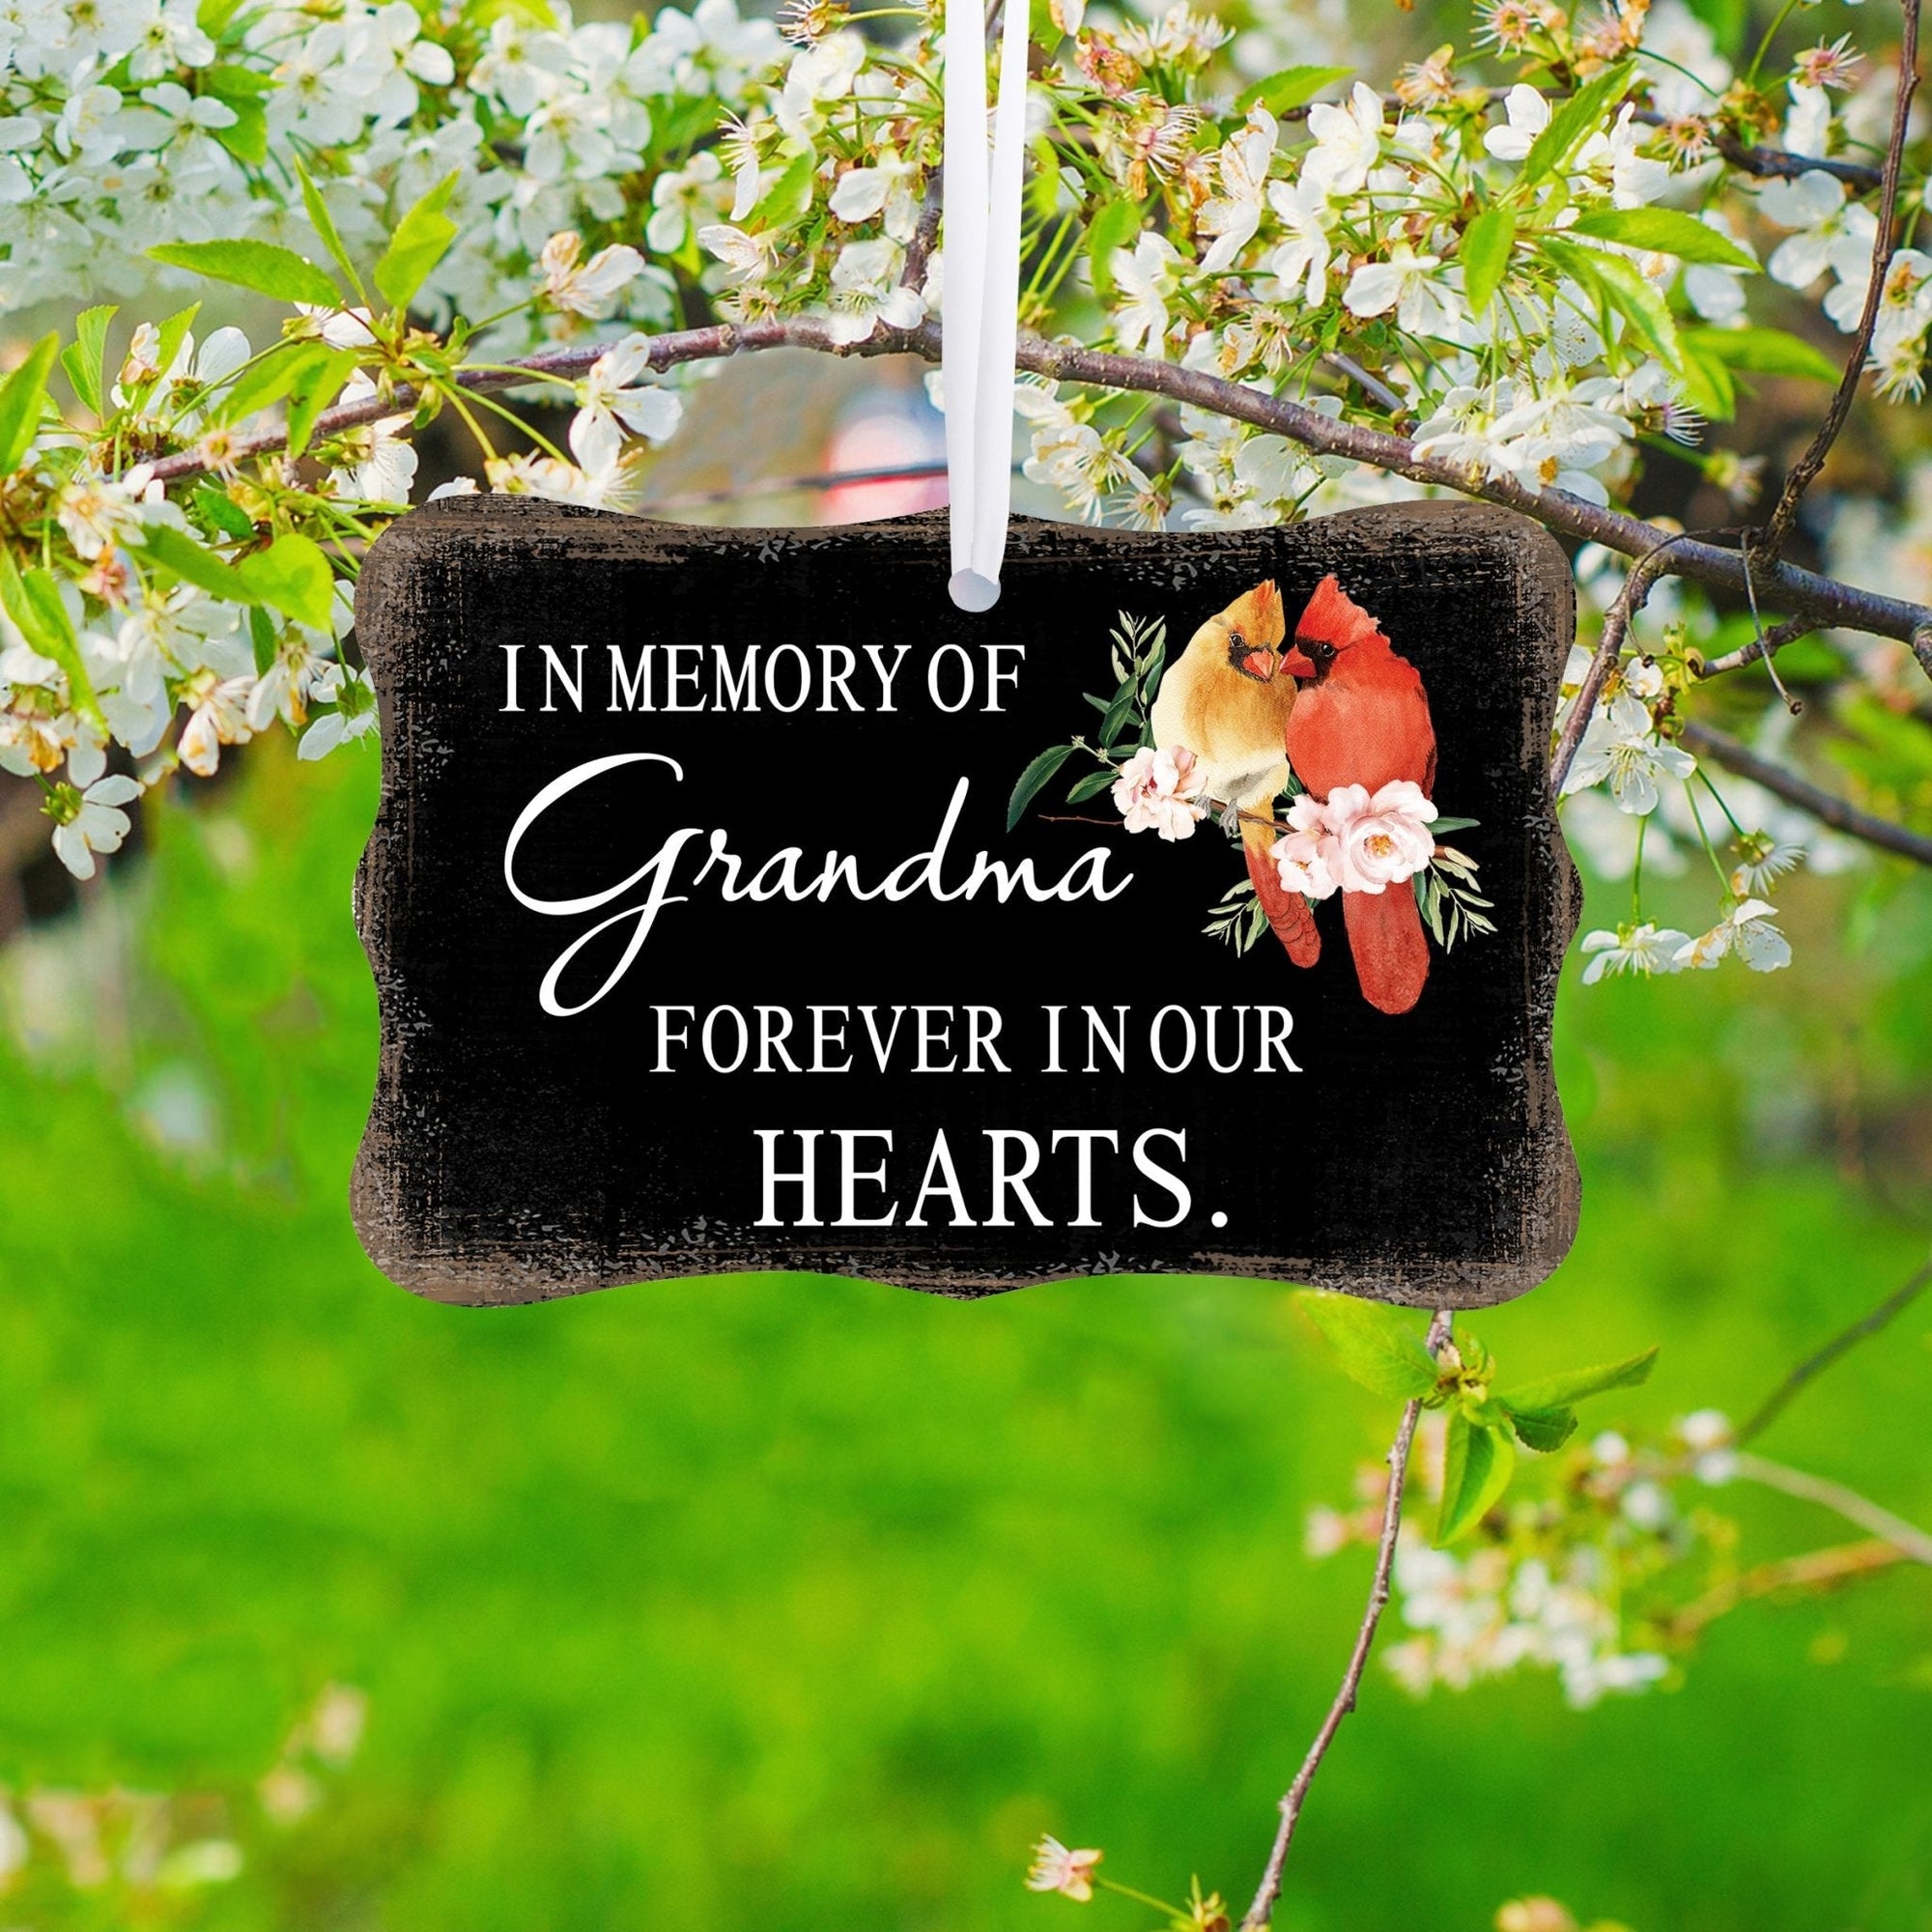 Memorial gifts for the loss of a loved one - A heartfelt and meaningful way to remember those we hold dear.